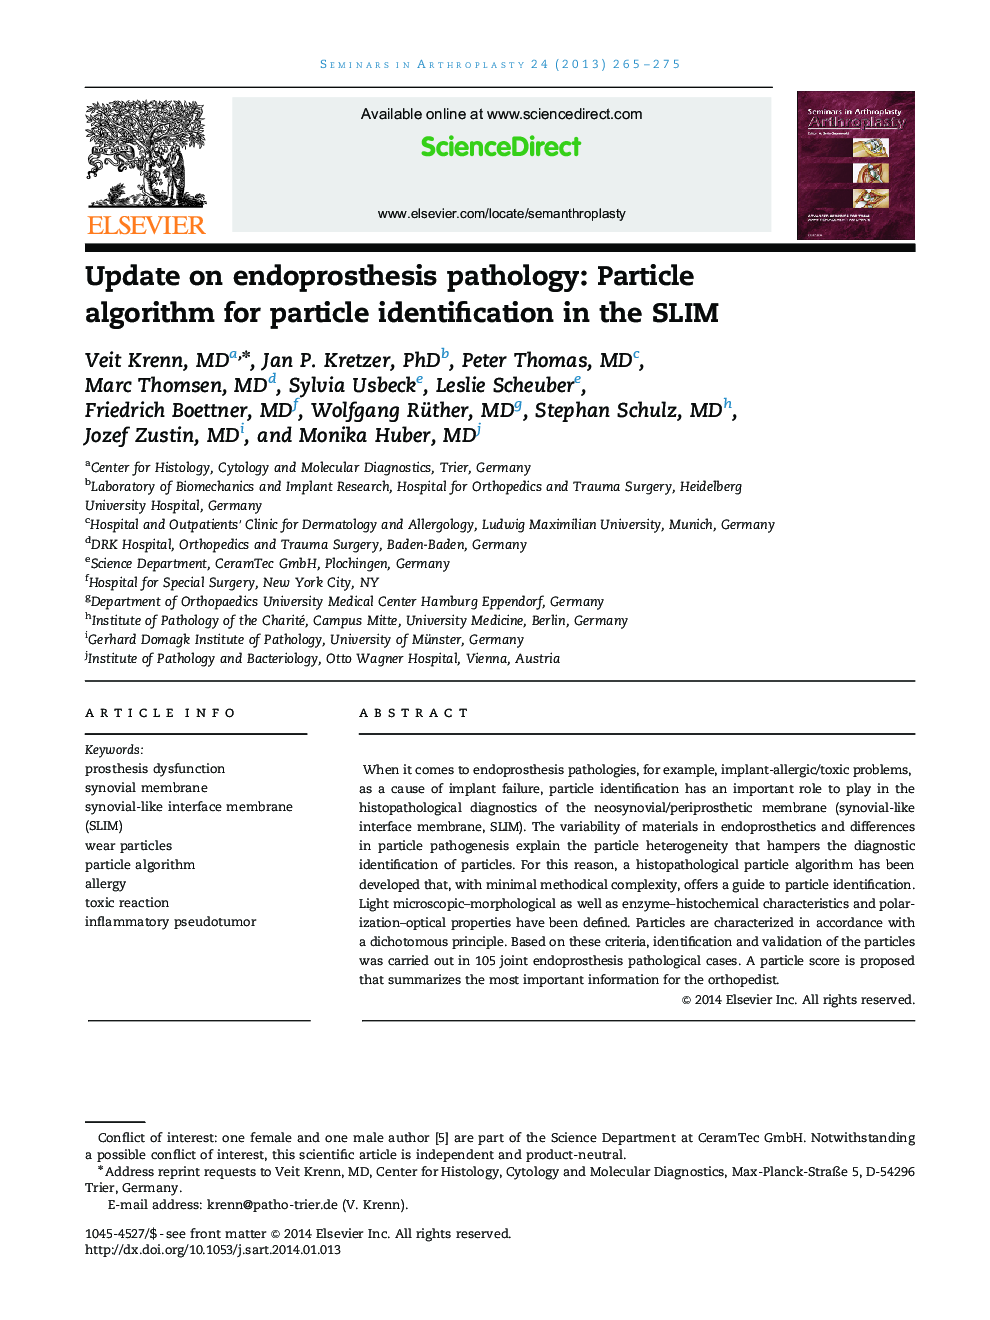 Update on endoprosthesis pathology: Particle algorithm for particle identification in the SLIM 